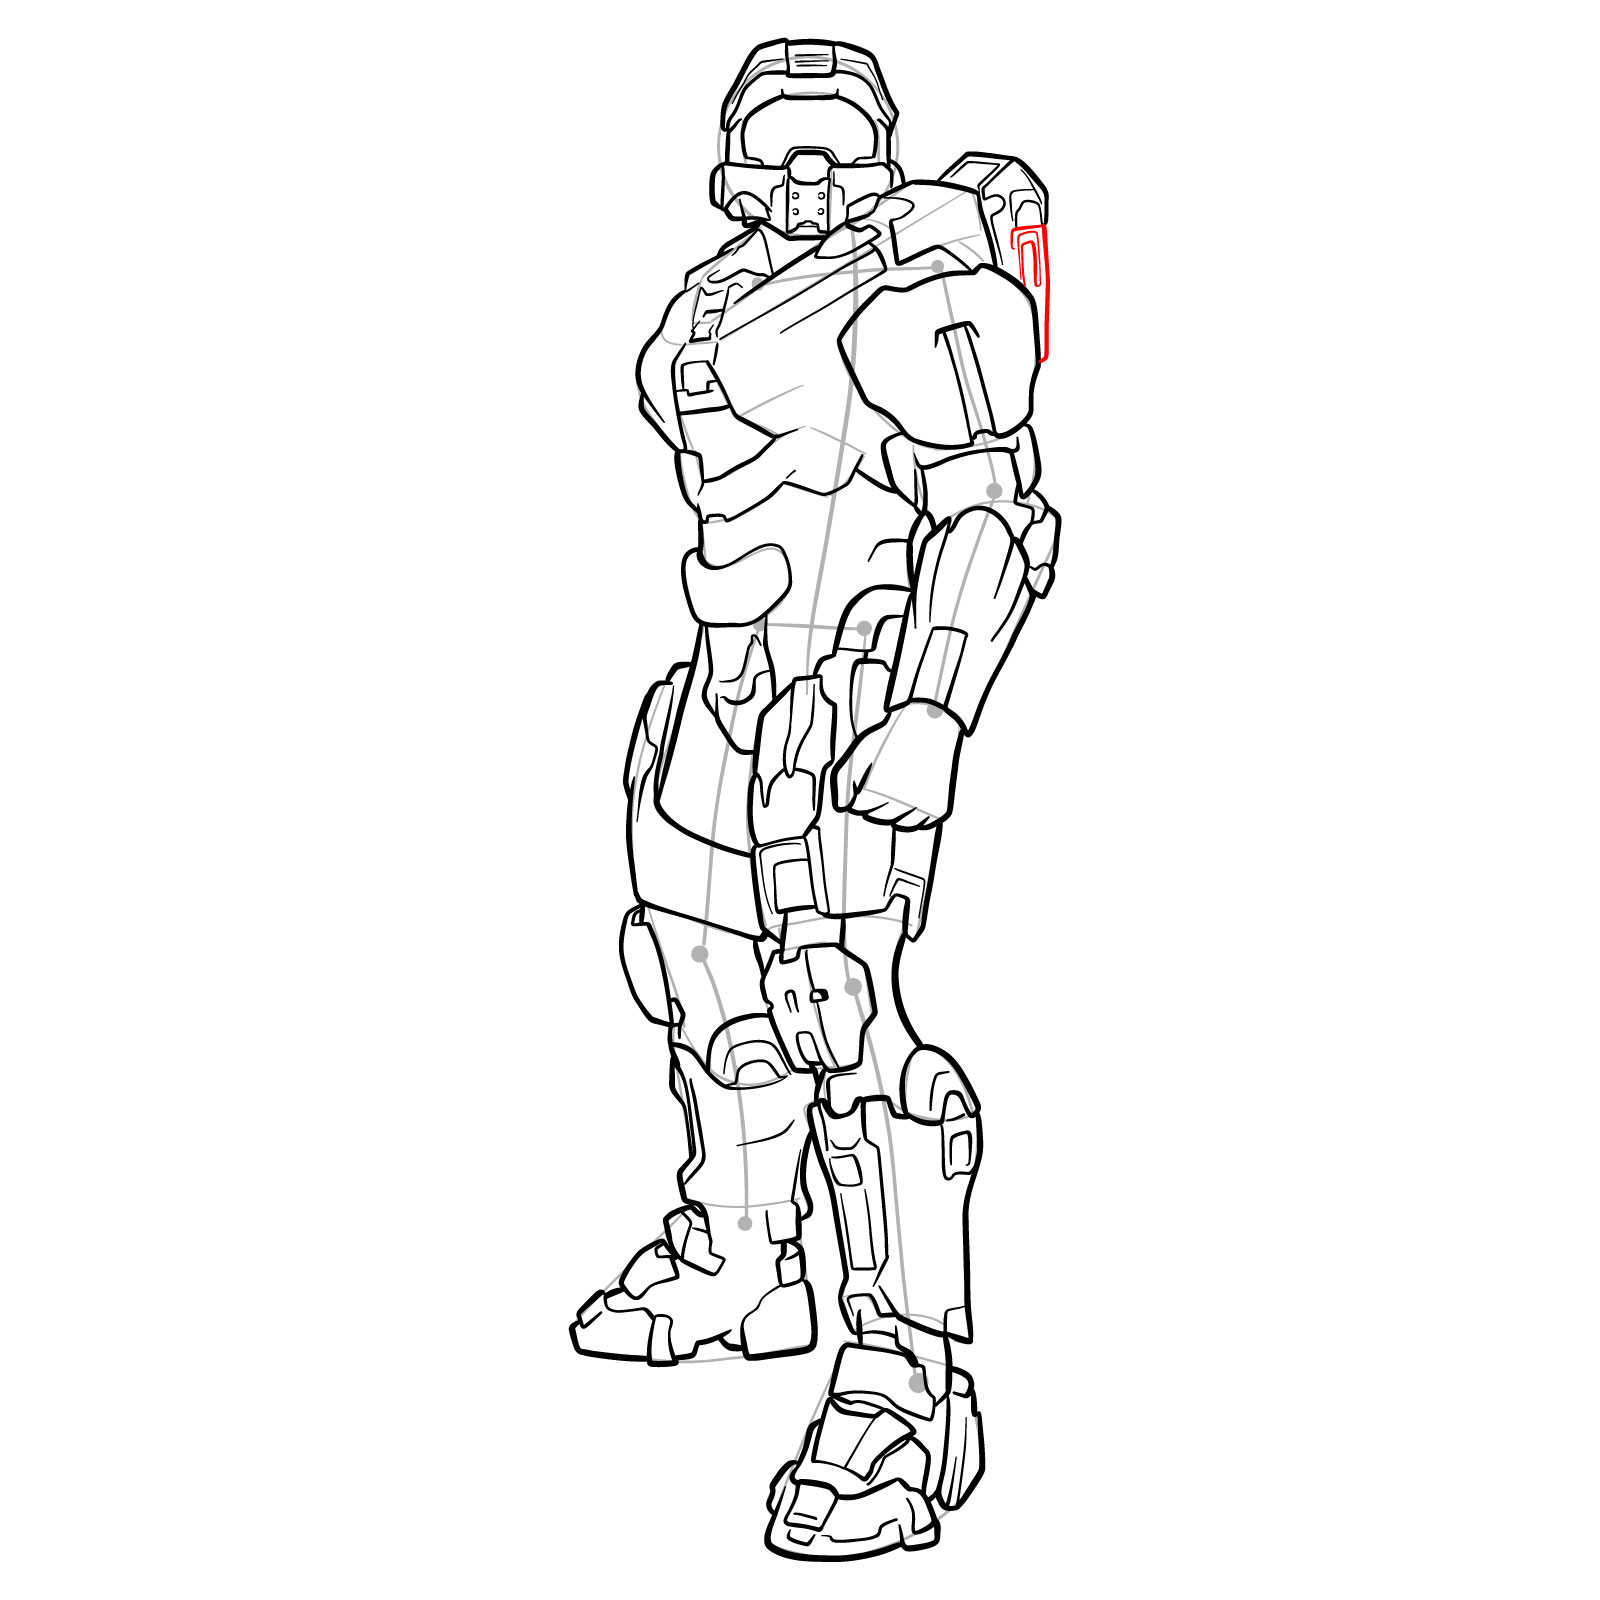 How to Draw Master Chief Petty Officer John-117 - step 42